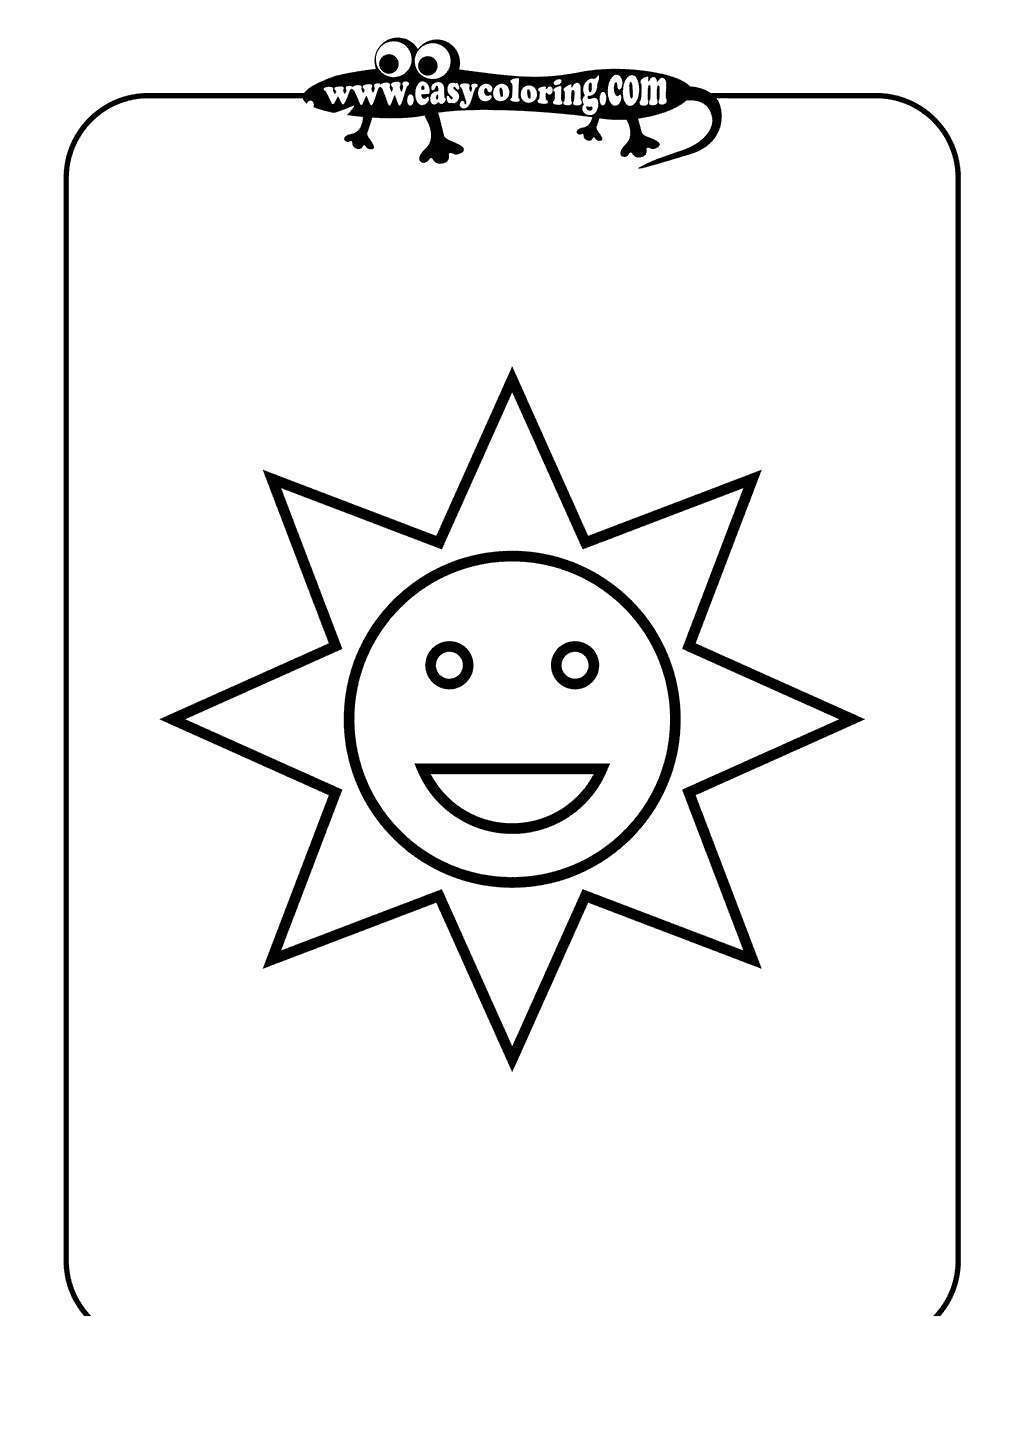 Free Sun Black and White Shapes Coloring Pages printable